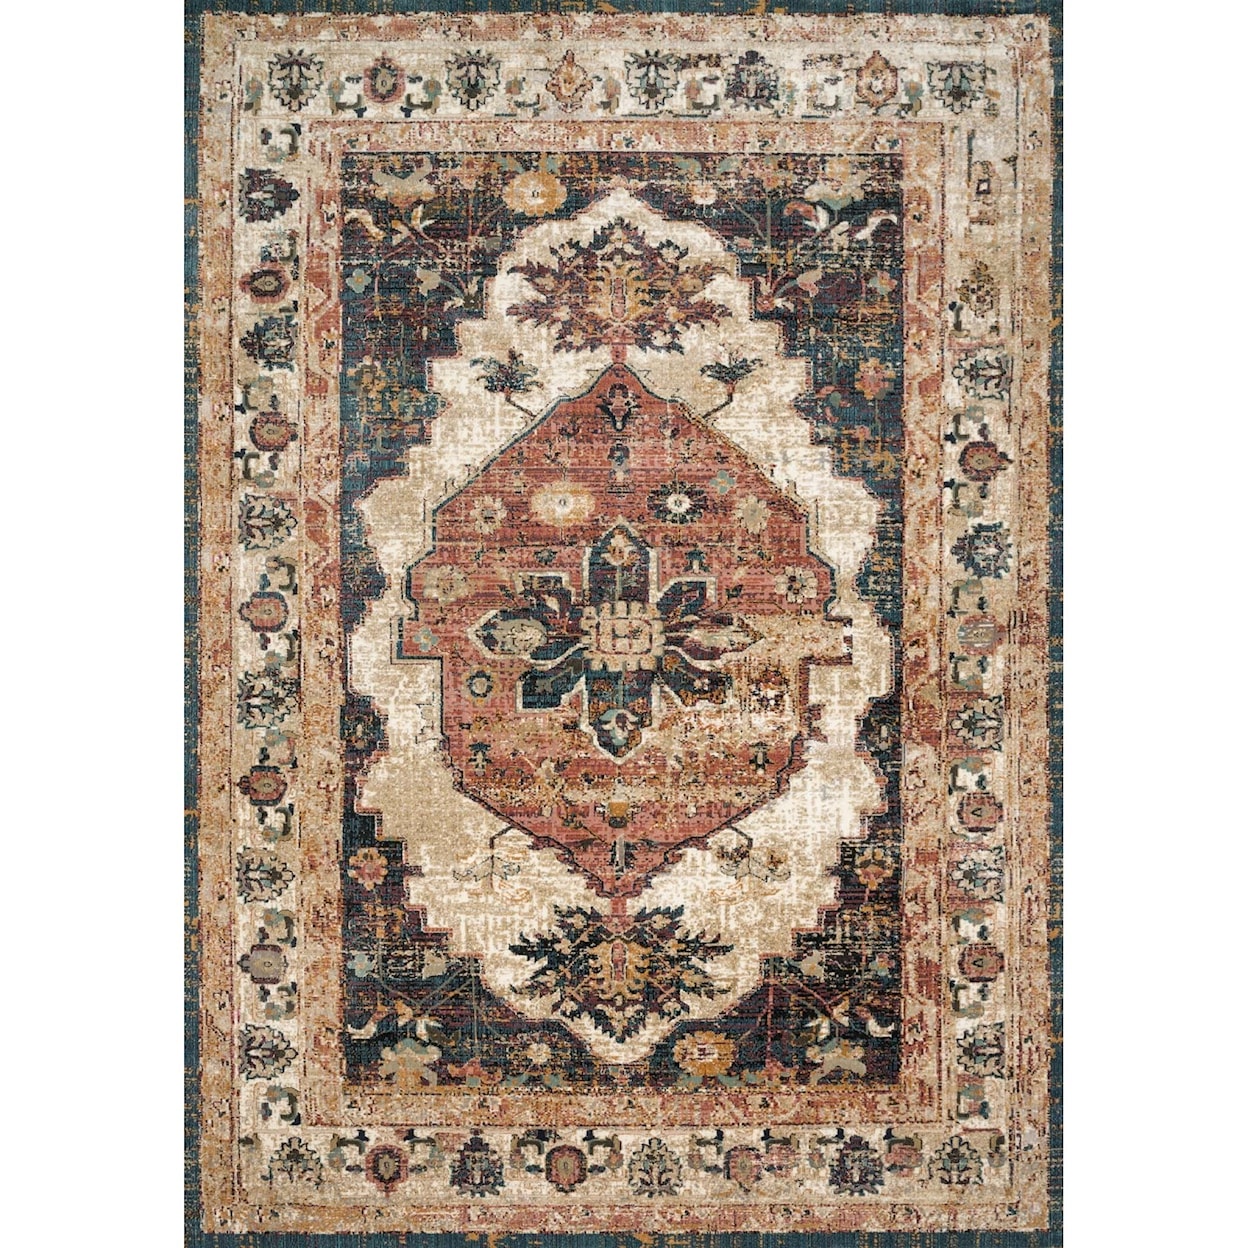 Magnolia Home by Joanna Gaines for Loloi Evie 1'-6" x 1'-6" Square Rug